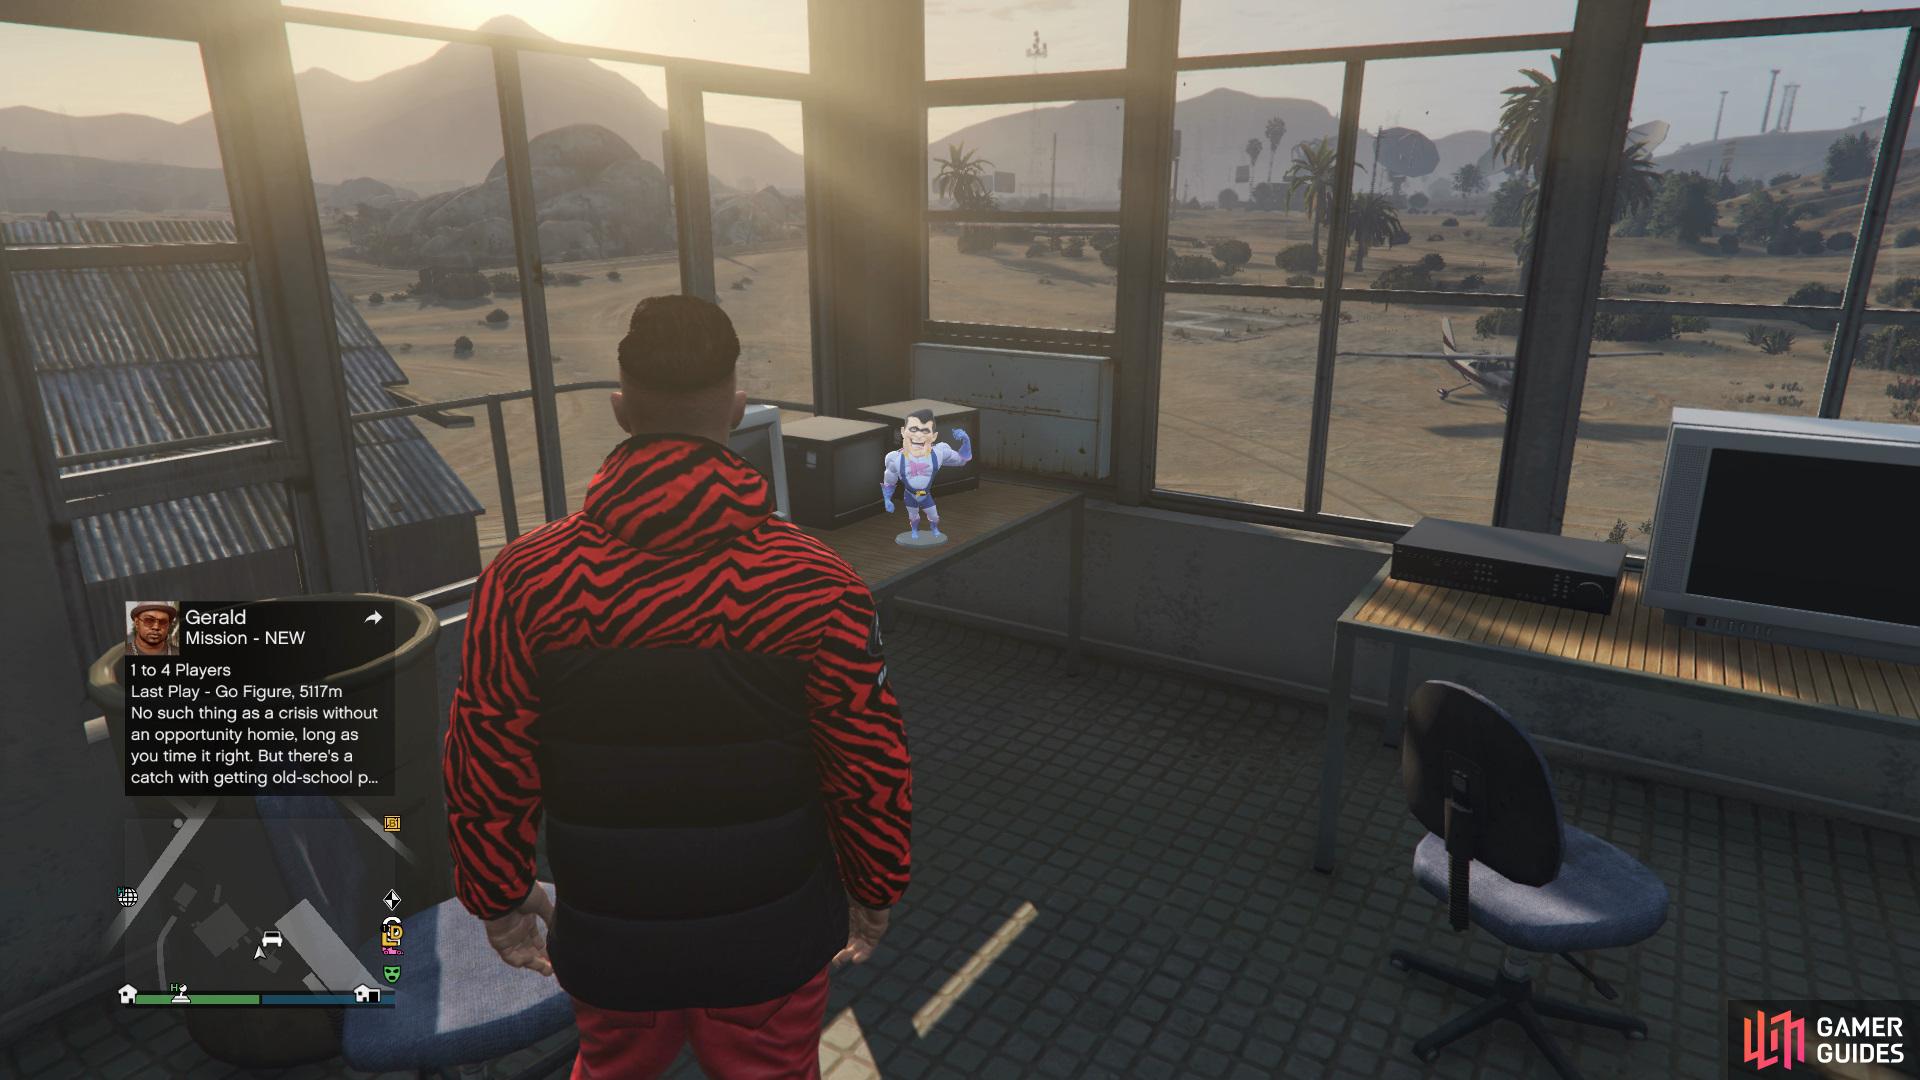 to find the action figure sitting in the sandy shores airfield control tower.